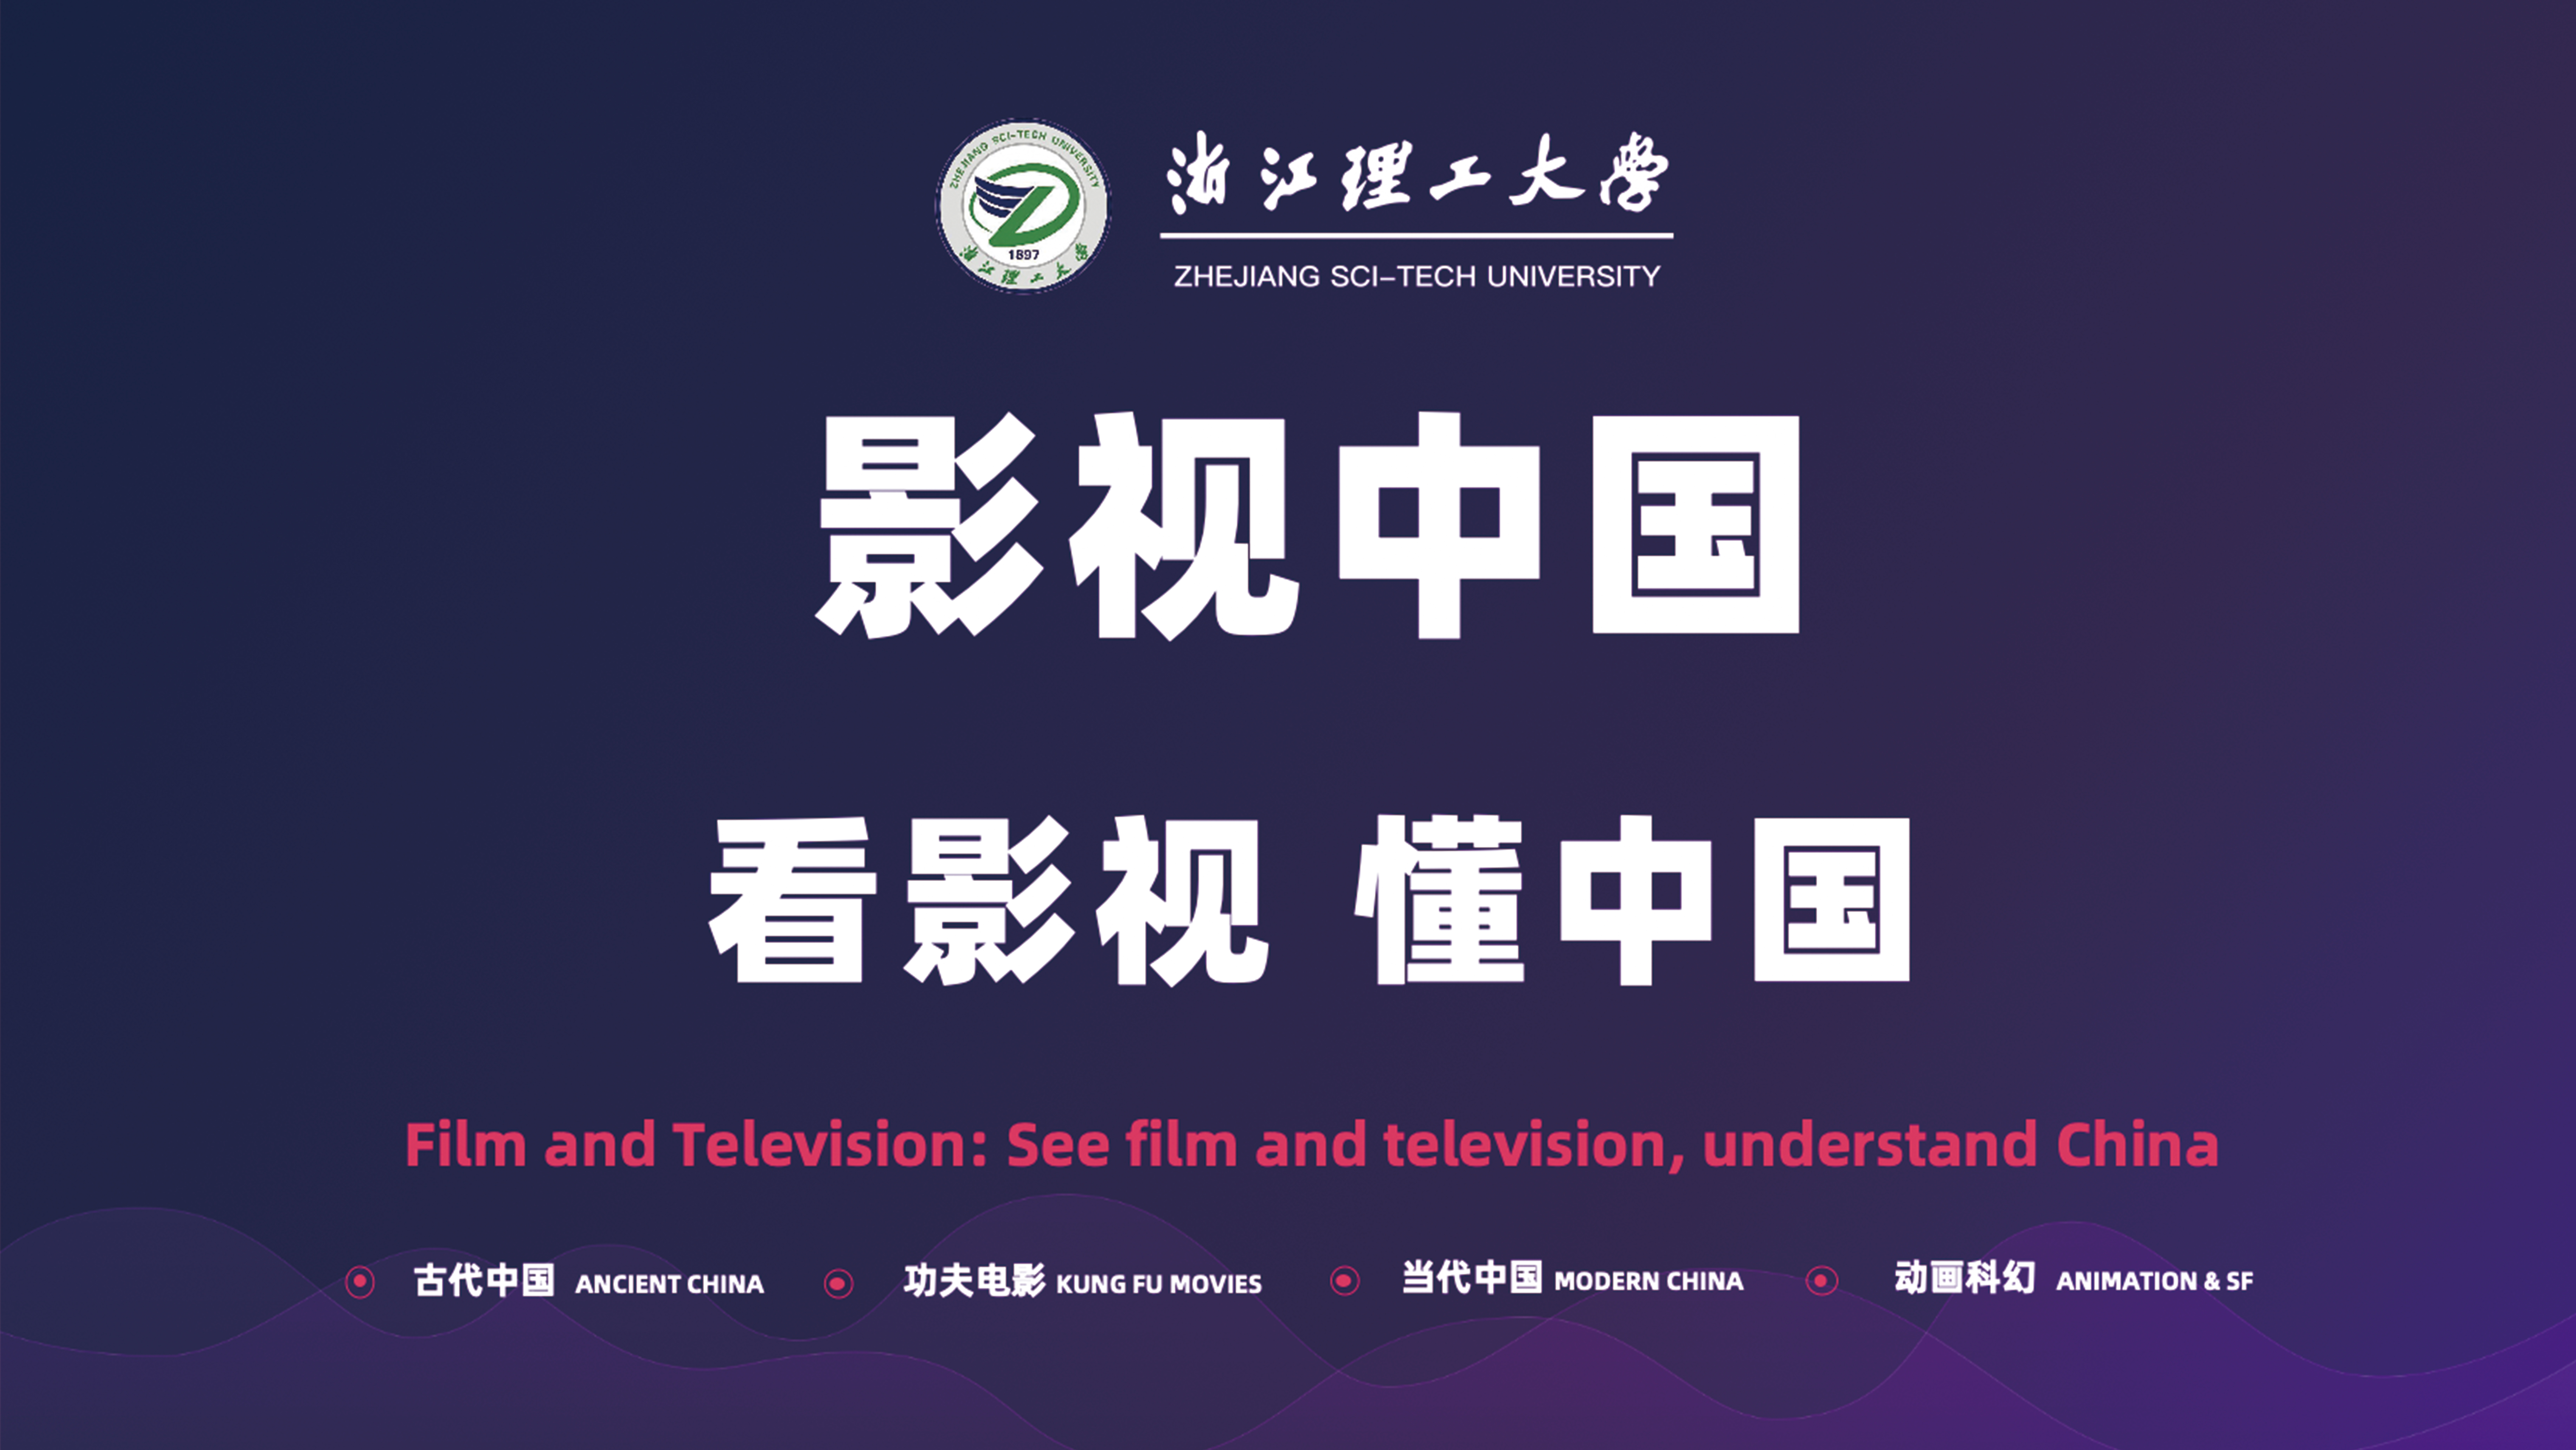 Film and Television: See film and television, understand China